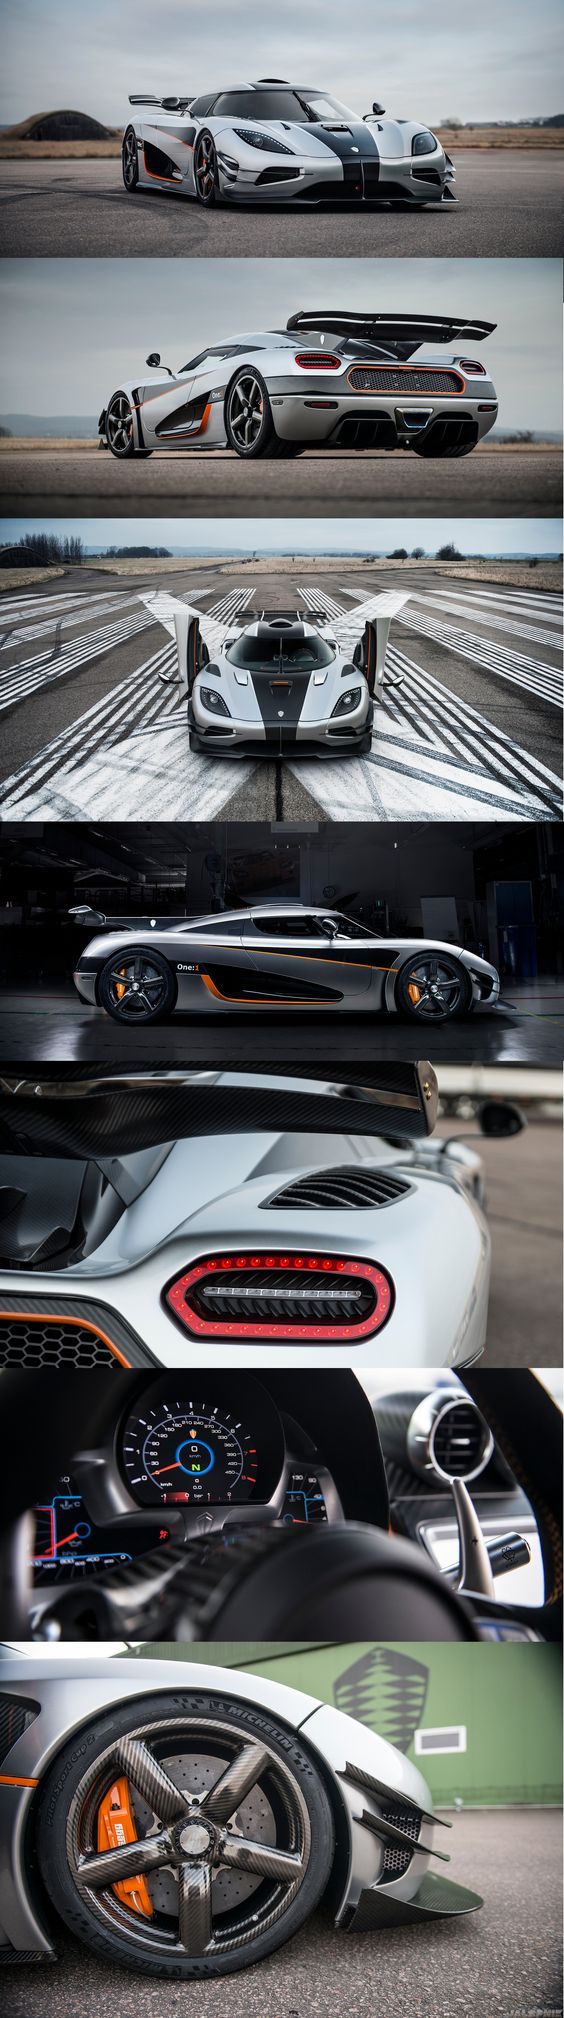 ALL NEW “ 2017 Koenigsegg One:1”, 2017 Concept Car Photos and Images, 2017 Cars